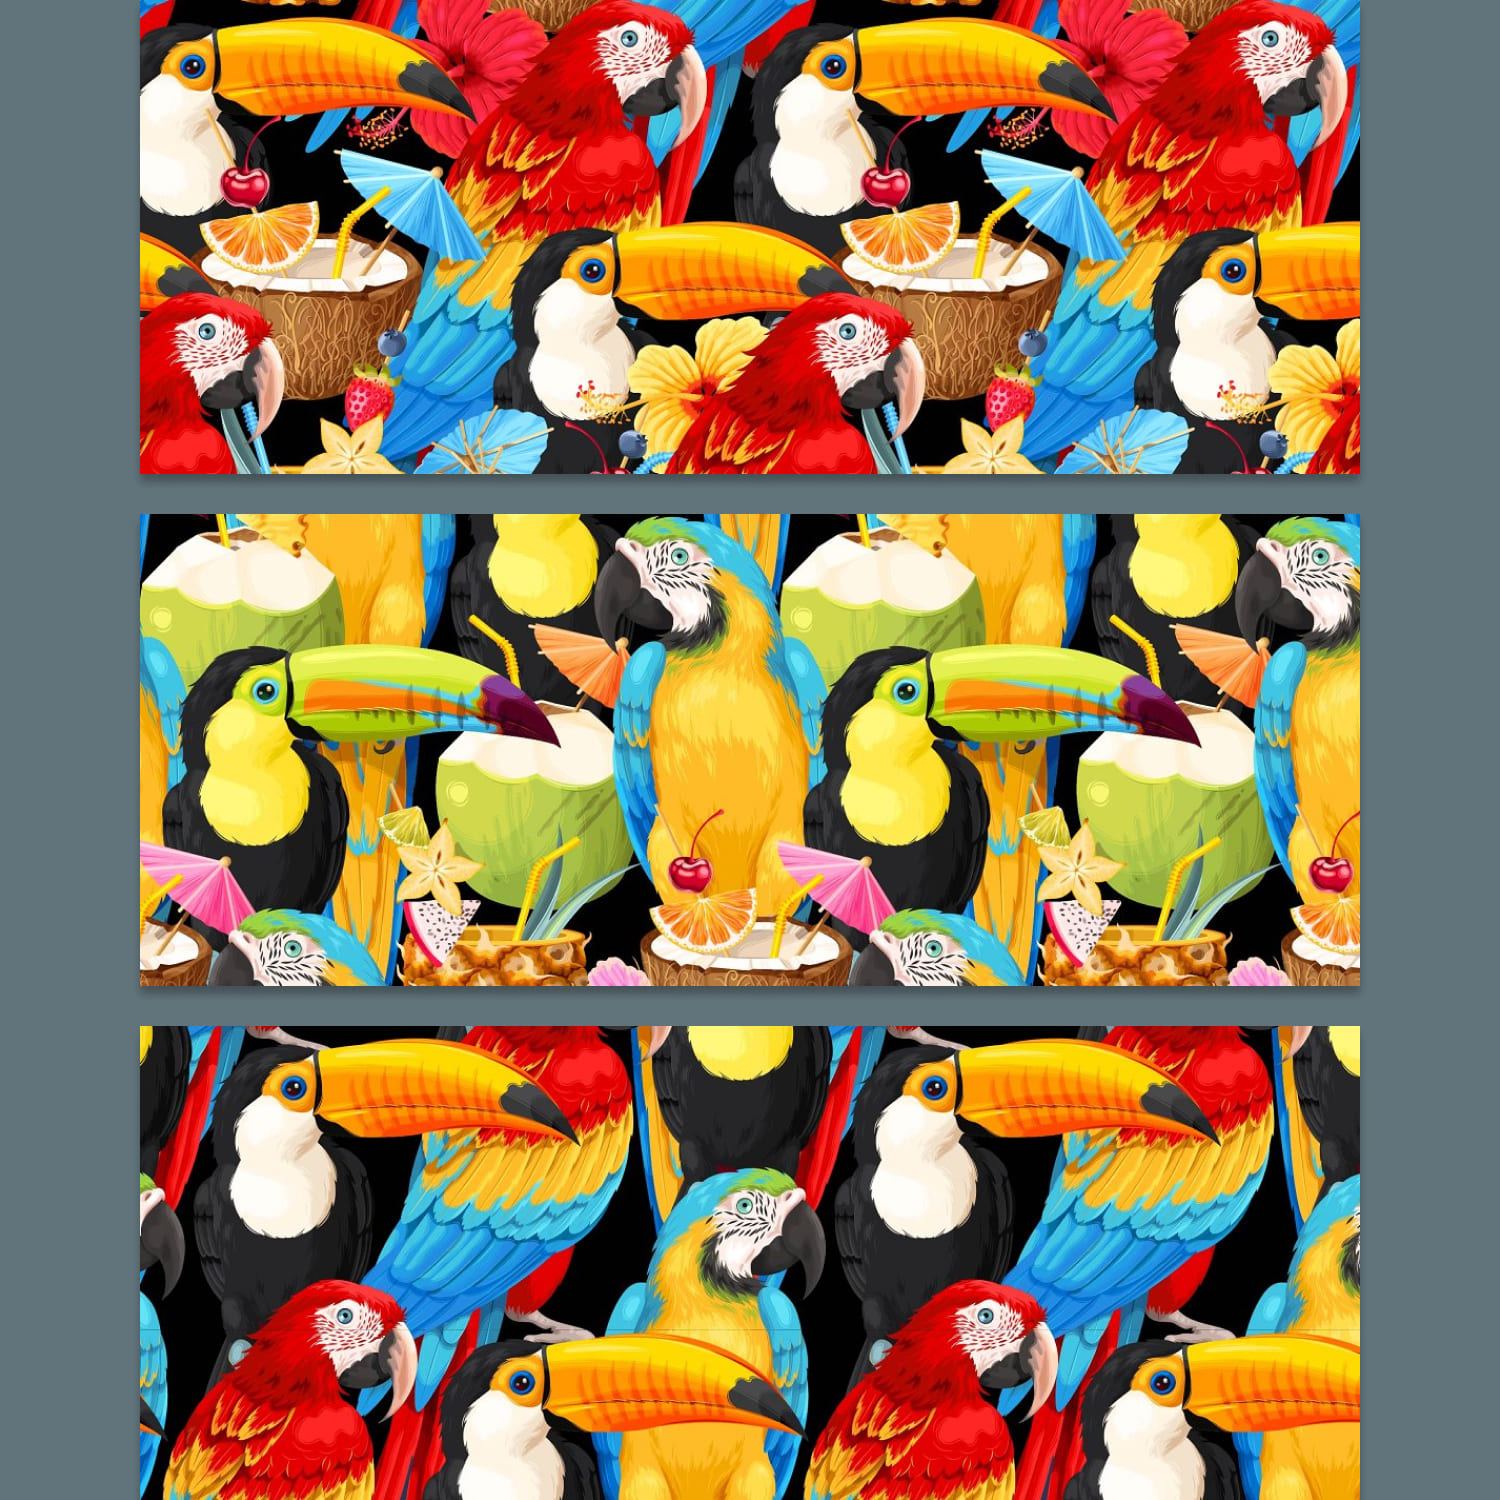 Macaw and Toucan Patterns created by GreyLilac.